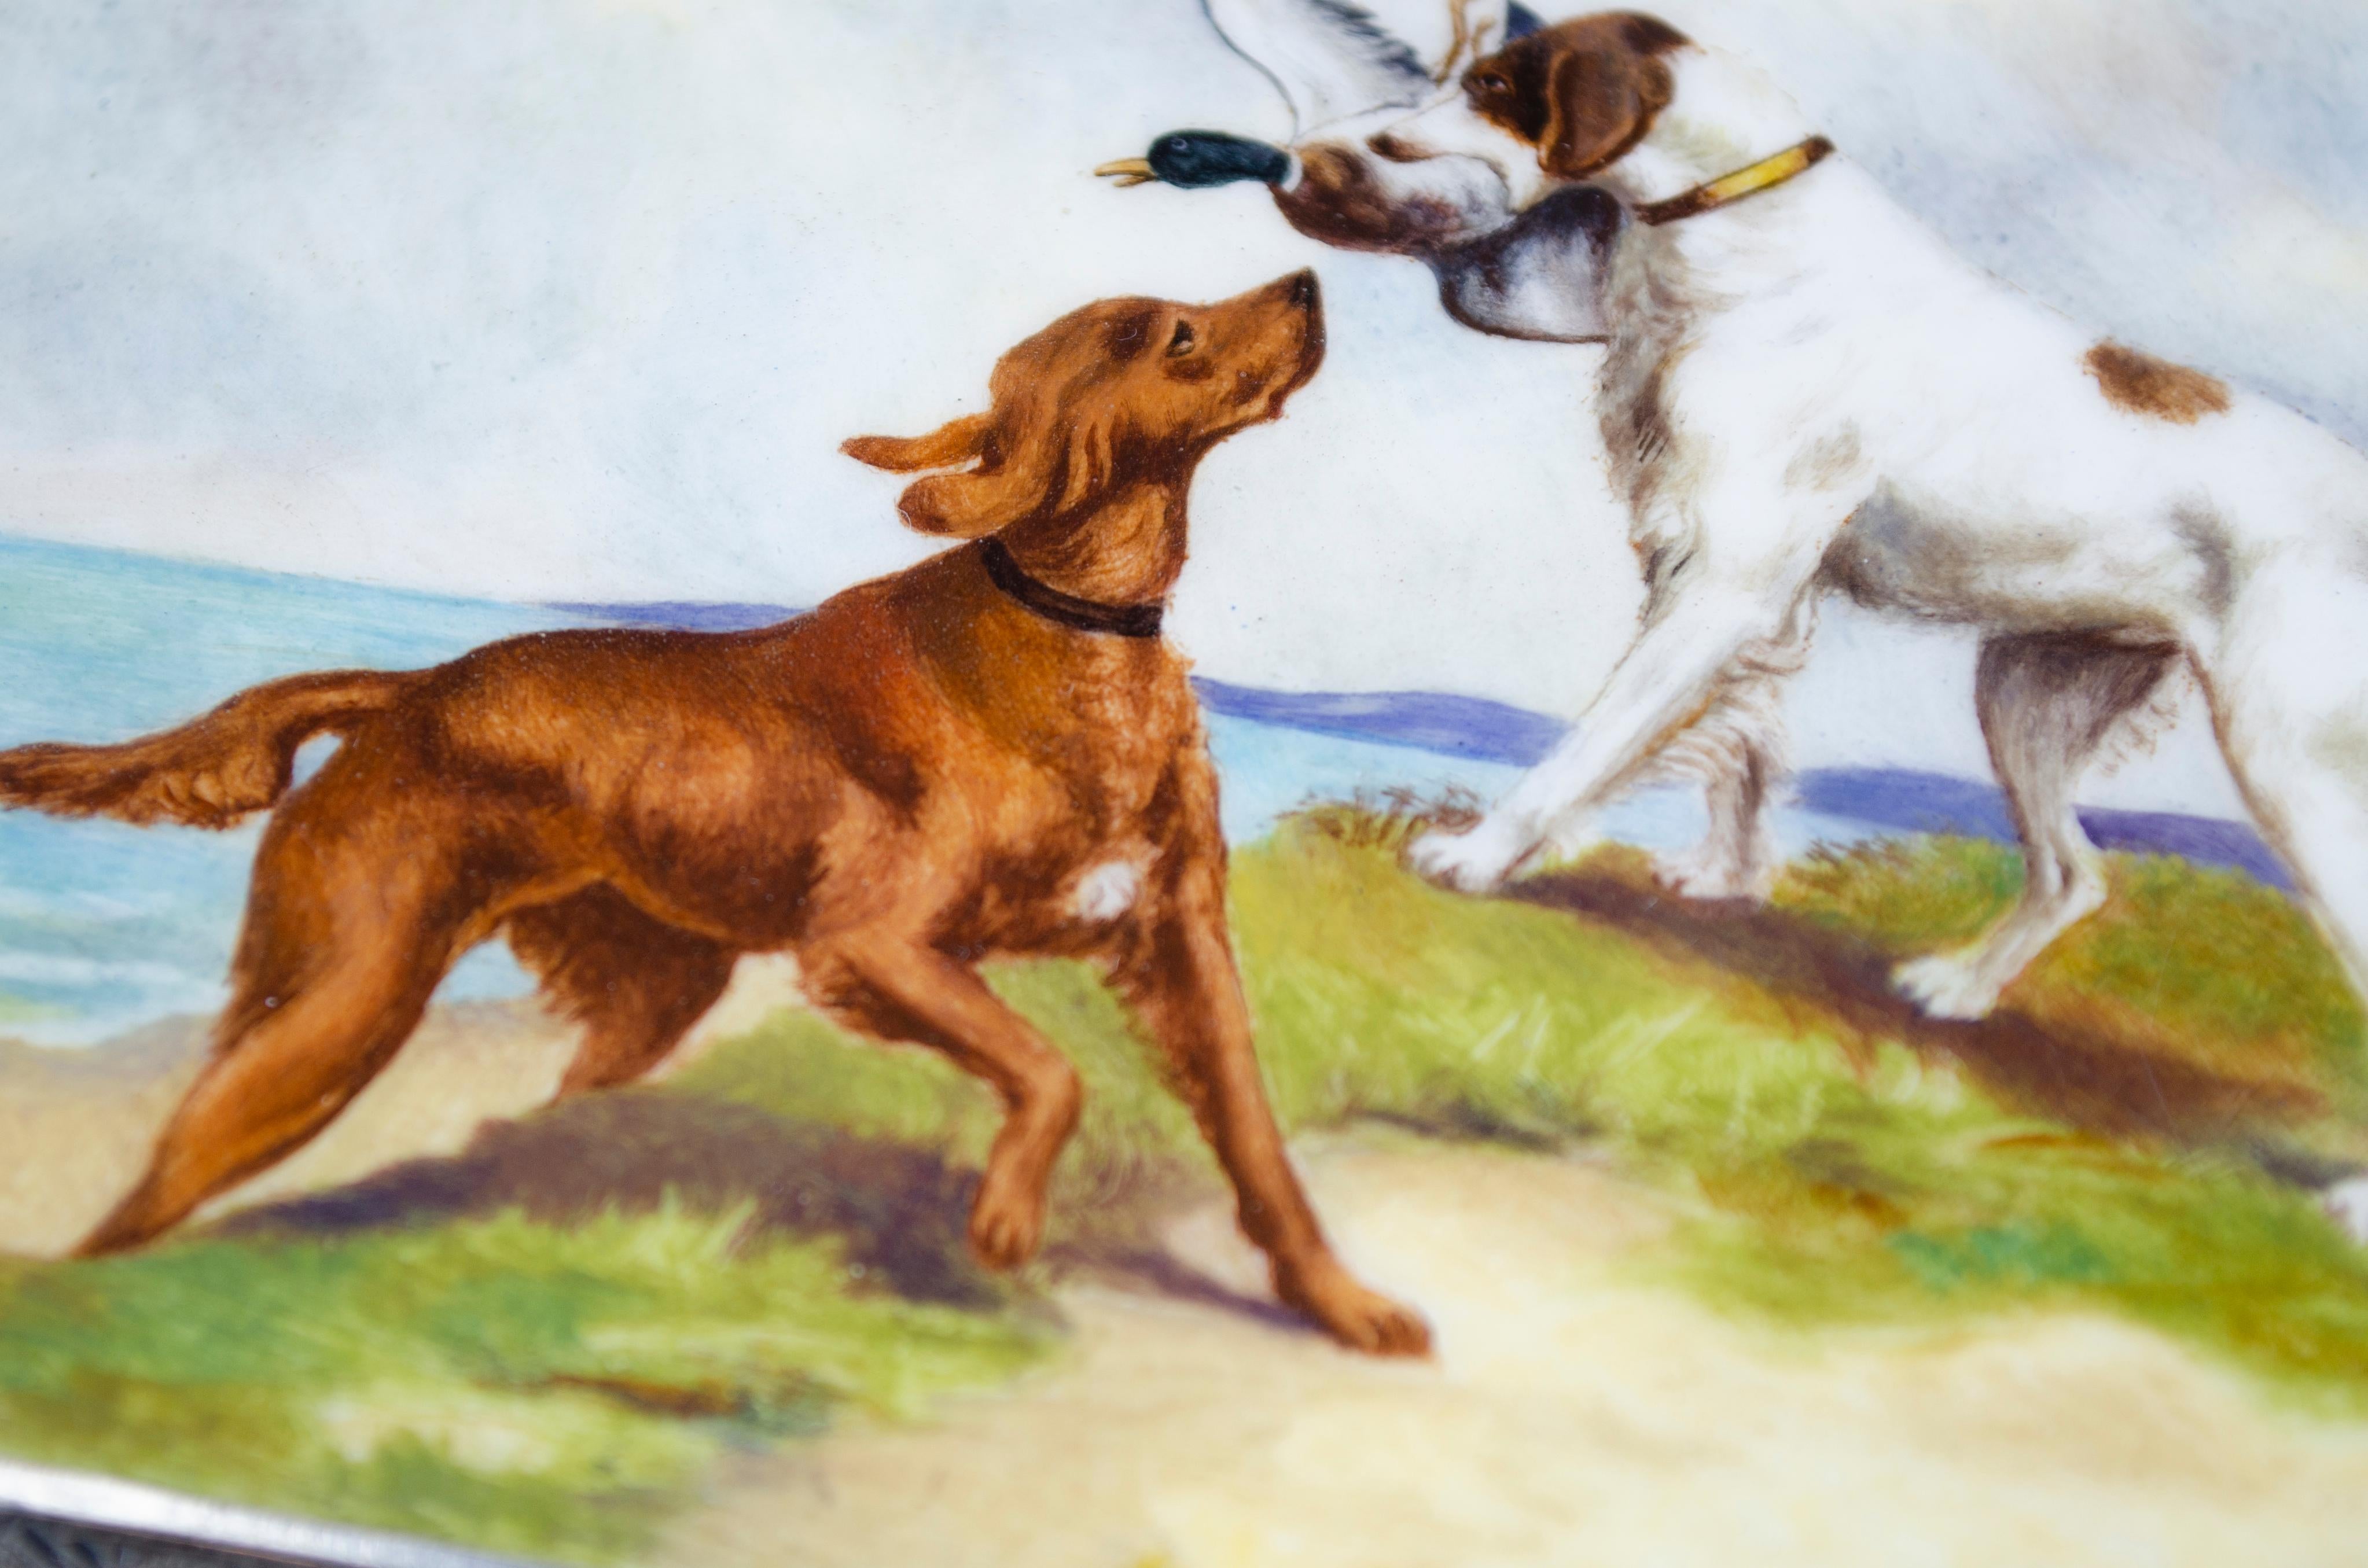 German silver and enamel cigarette case
Origin Germany Circa 1930
Hand-painted scene of two beautiful hunting dogs
its interior is vermeil and its opening button has some sapphires
Excellent condition and without restorations
It has the stamp of the